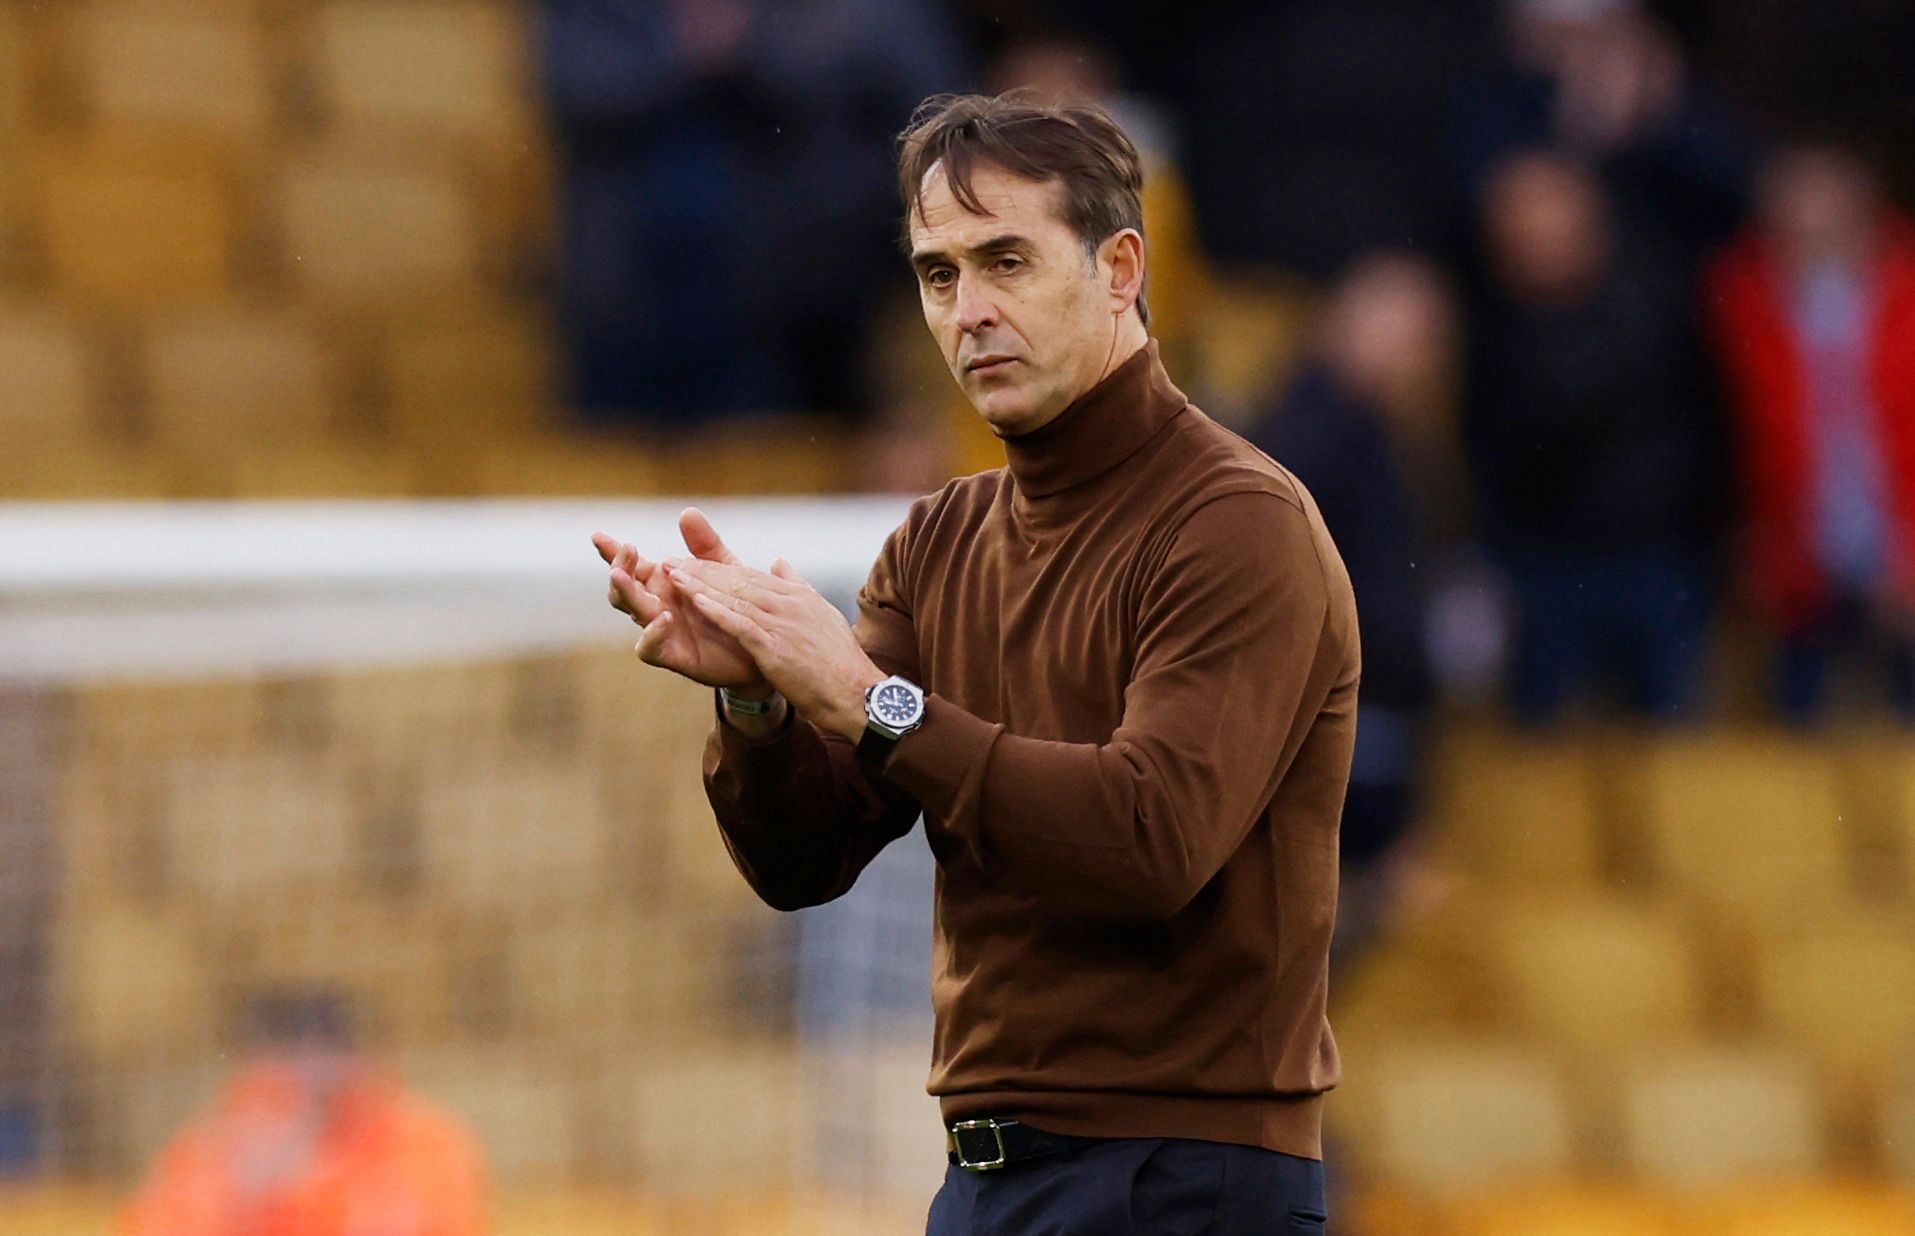 Soccer Football - Premier League - Wolverhampton Wanderers v Manchester United - Molineux Stadium, Wolverhampton, Britain - December 31, 2022 Wolverhampton Wanderers manager Julen Lopetegui applauds fans after the match Action Images via Reuters/Andrew Couldridge EDITORIAL USE ONLY. No use with unauthorized audio, video, data, fixture lists, club/league logos or 'live' services. Online in-match use limited to 75 images, no video emulation. No use in betting, games or single club /league/player p